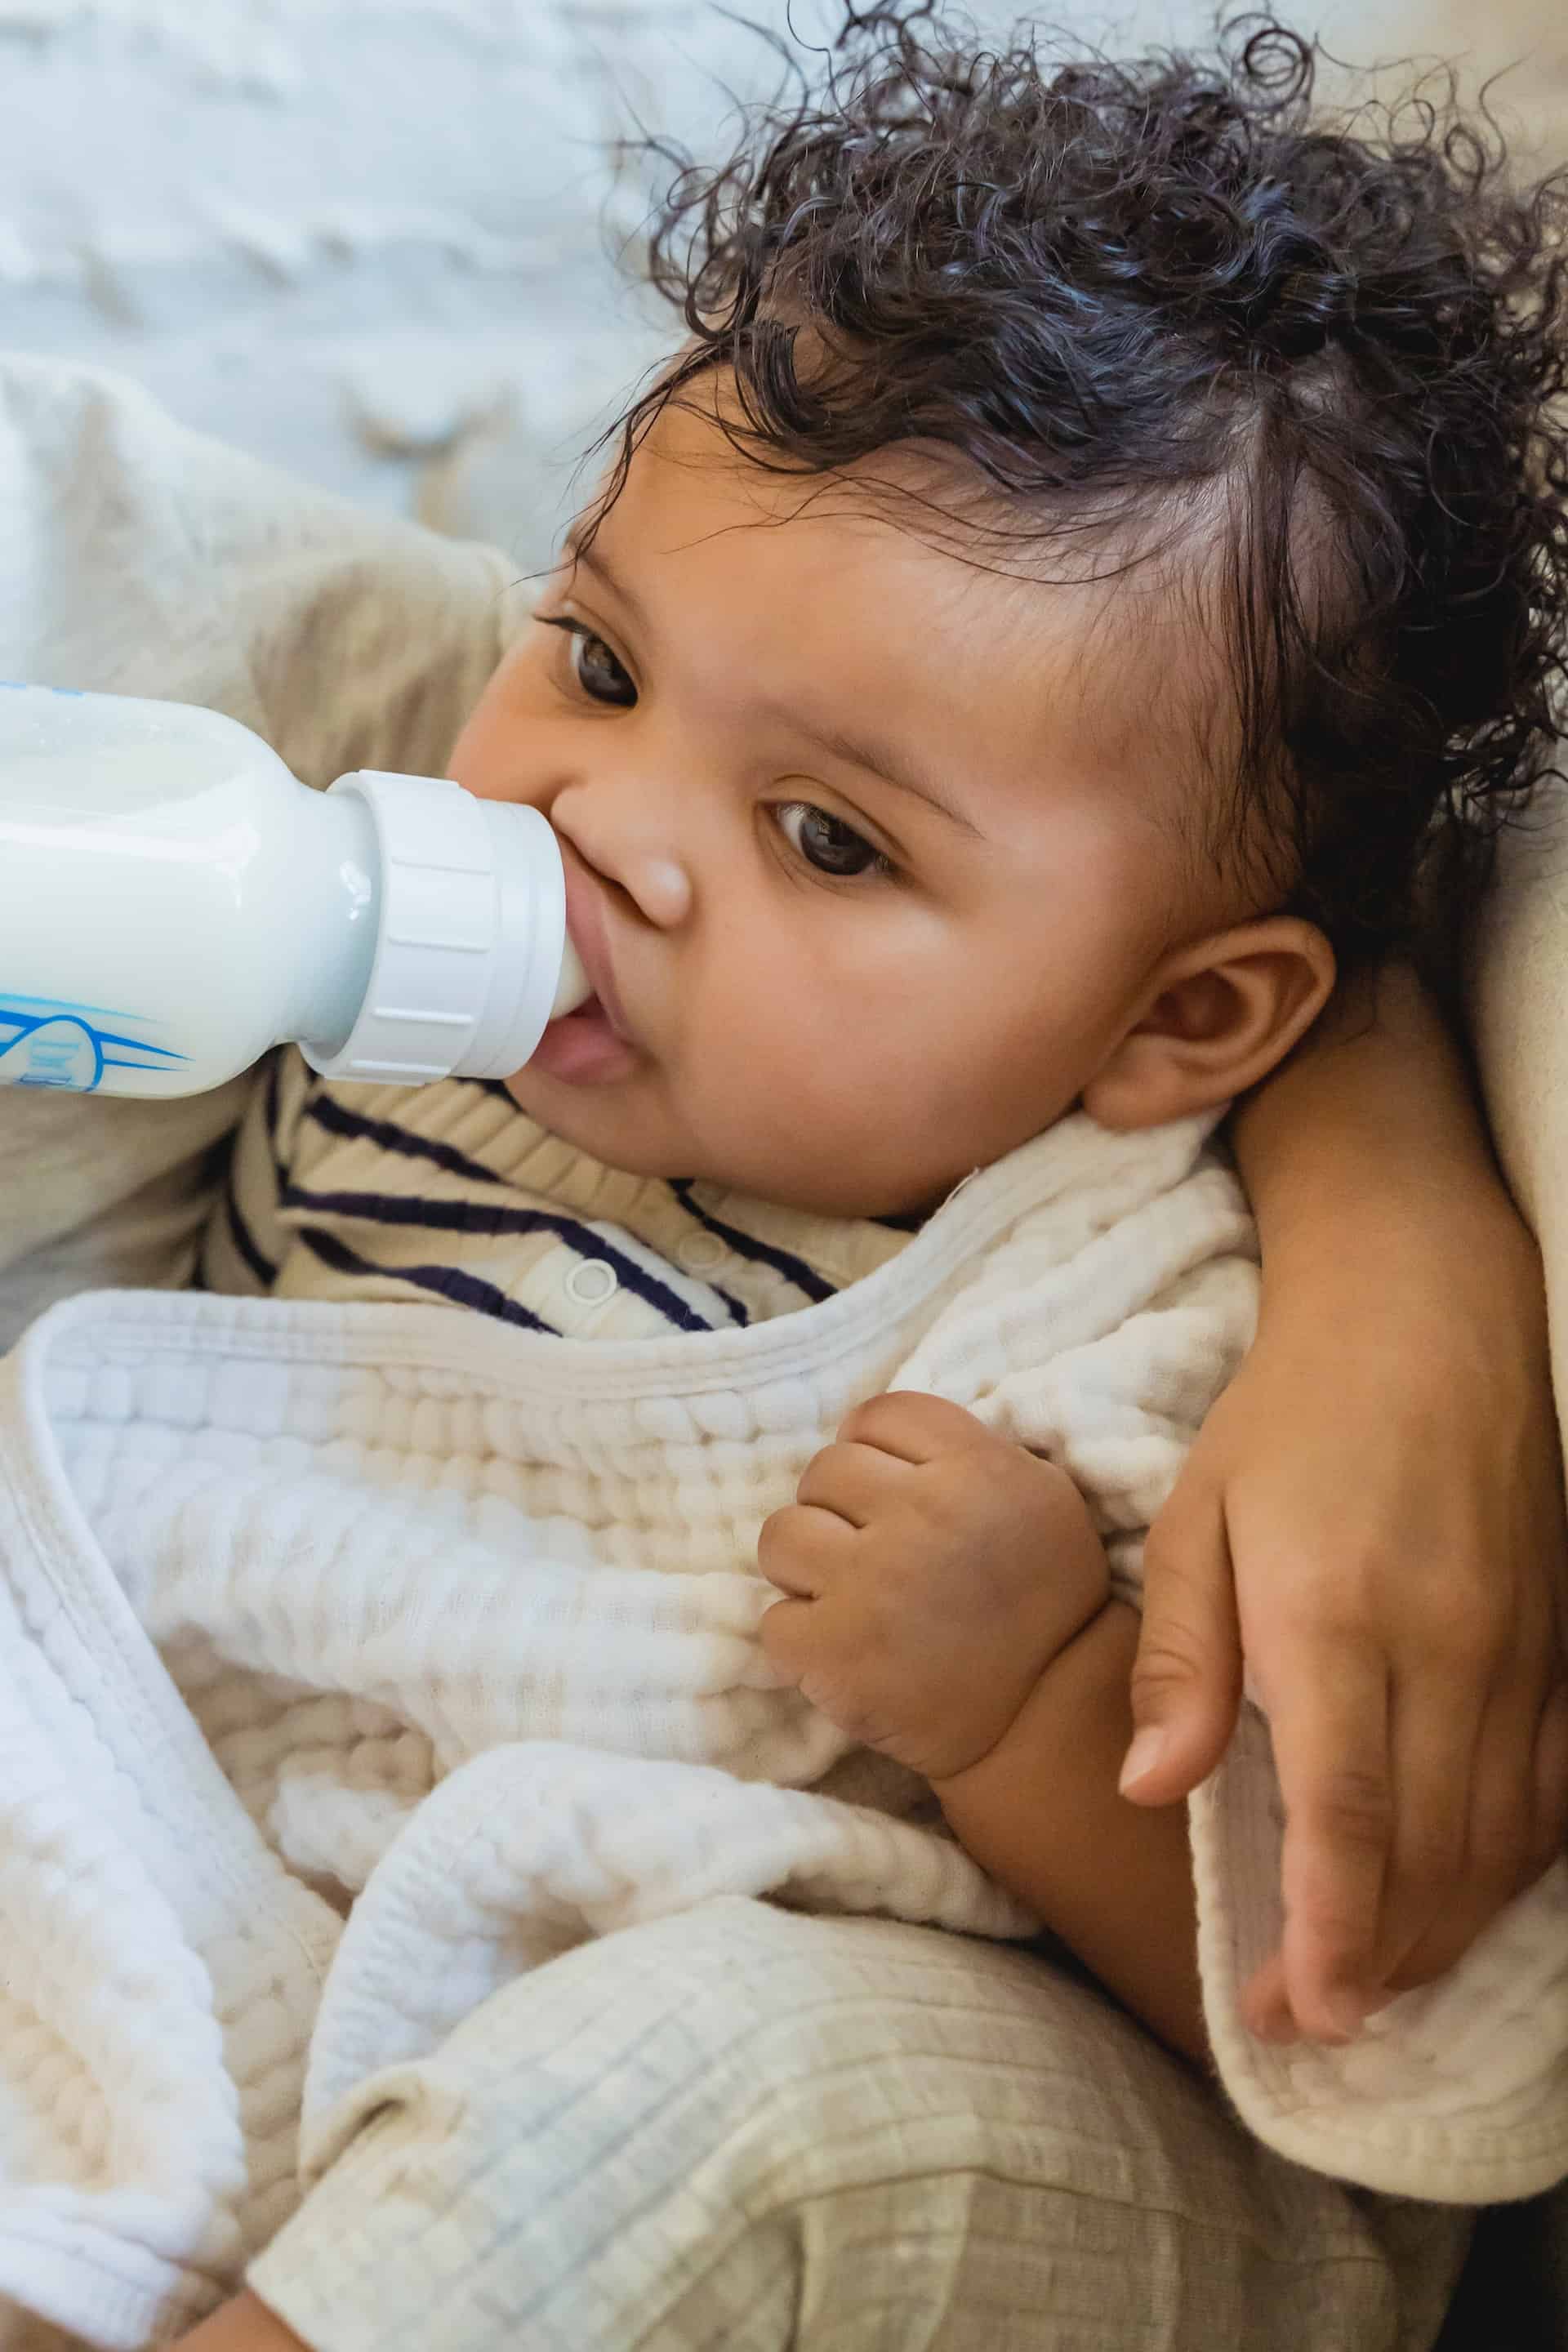 A young baby drinking from a bottle